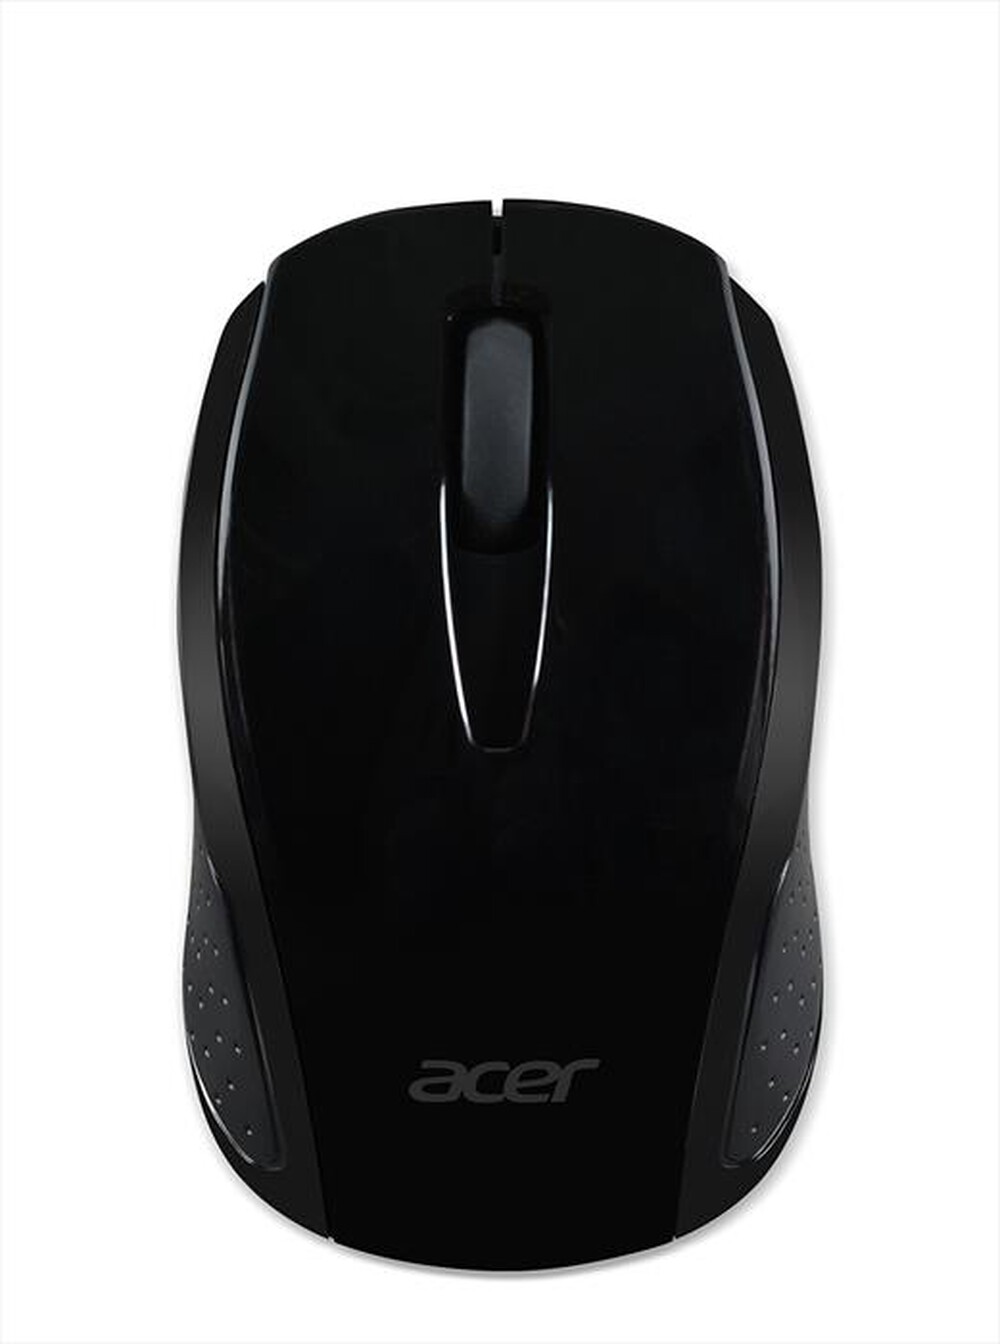 "ACER - 15.6\" ACER STARTER KIT CARRYING BAG WIRELESS MOUSE-Nero"